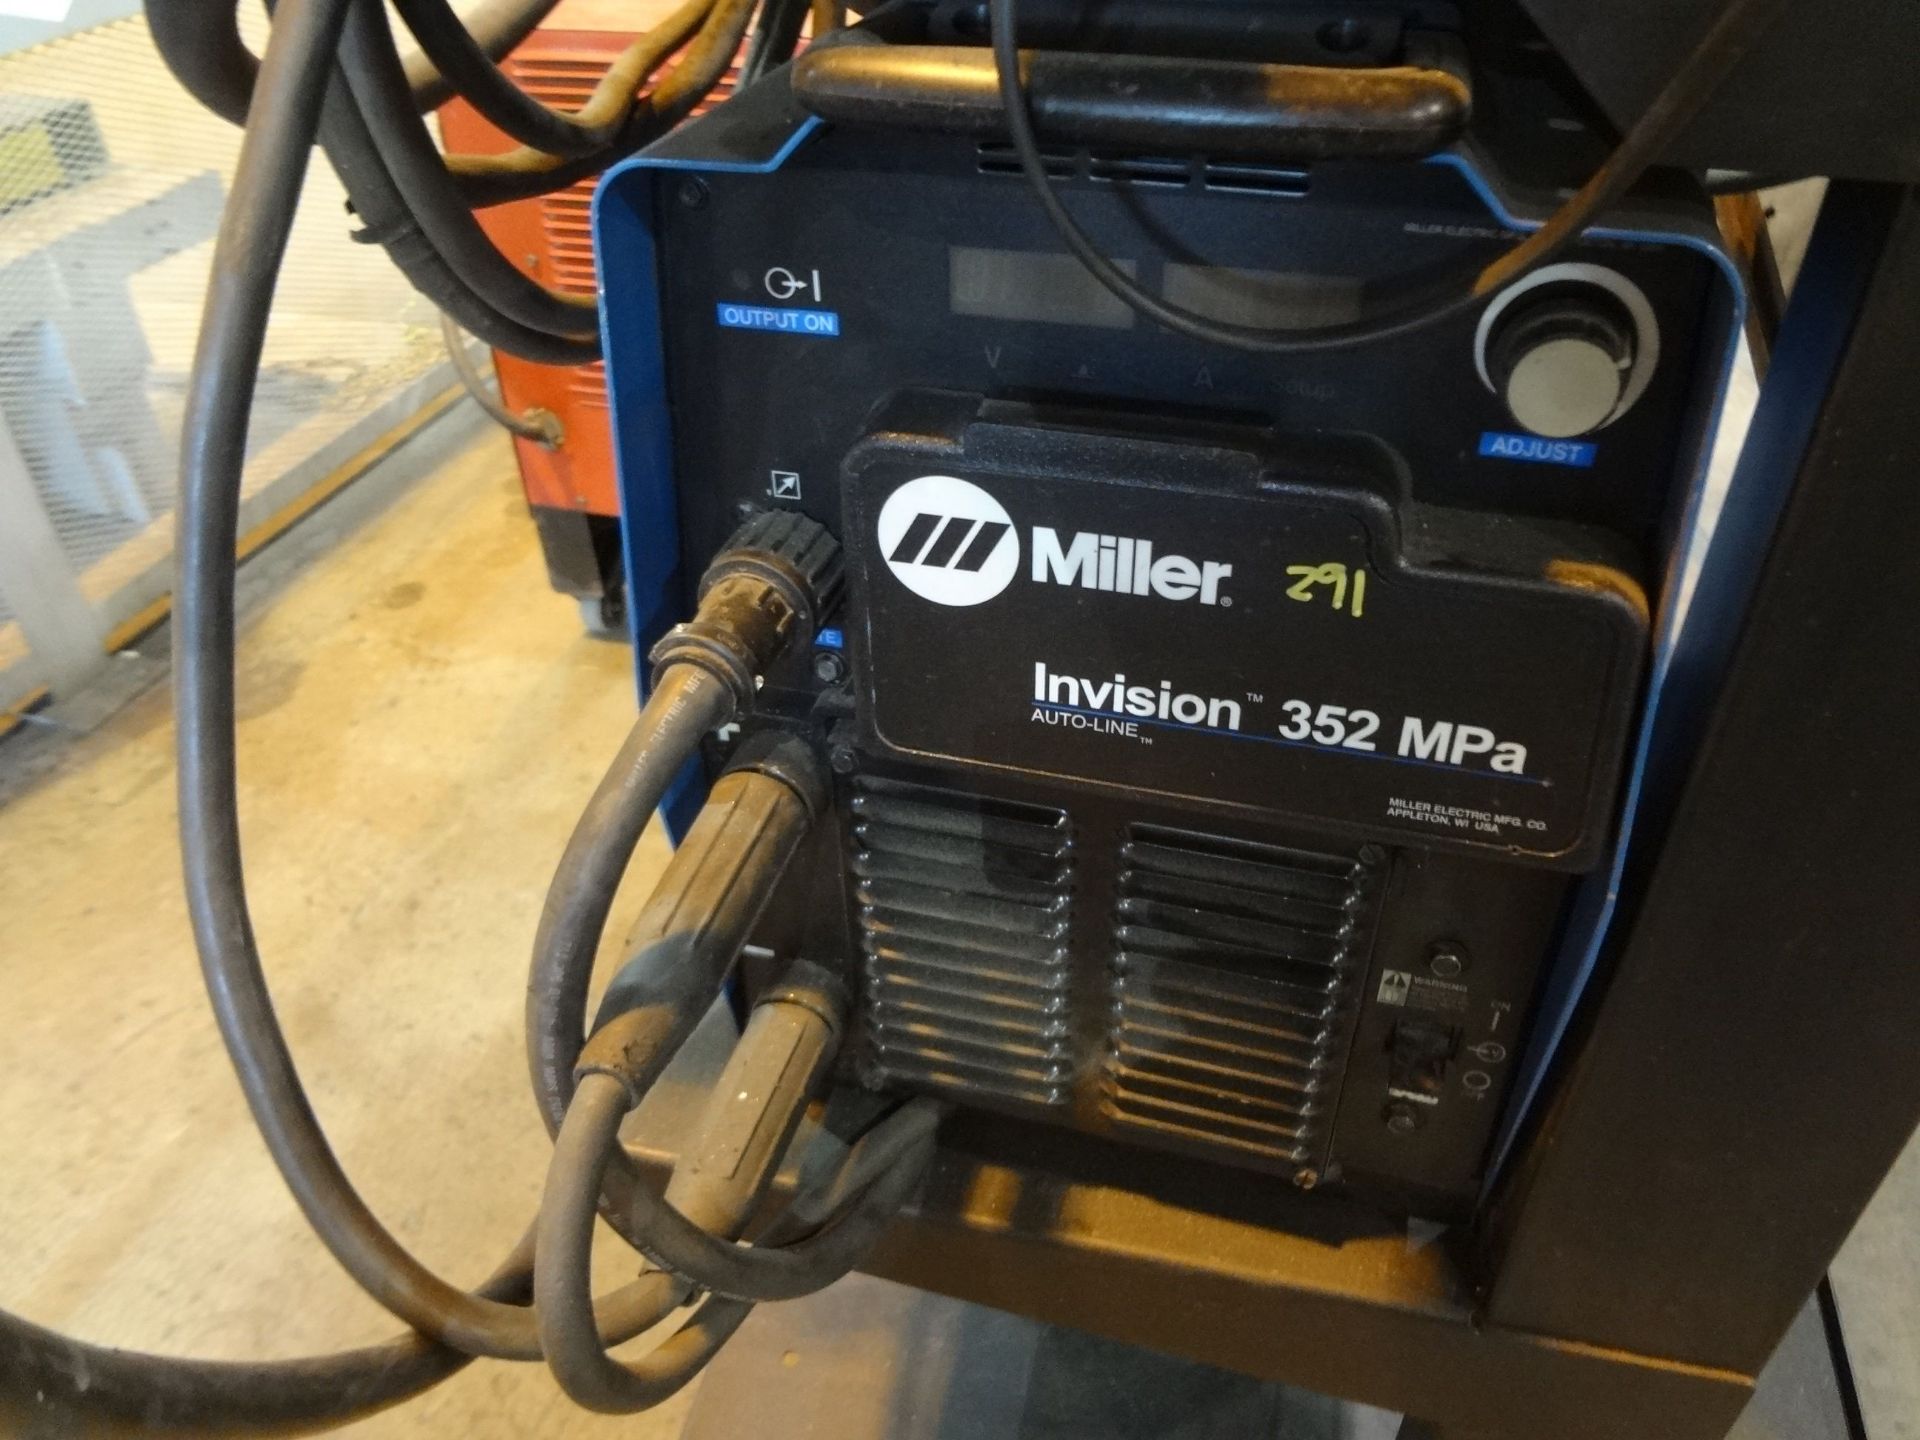 350 AMP MILLER INVISION 352 MPA AUTOLINE WELDER; S/N MD300146U, W/ MILLER S-74 MPA PLUS WIRE FEED - Image 2 of 3